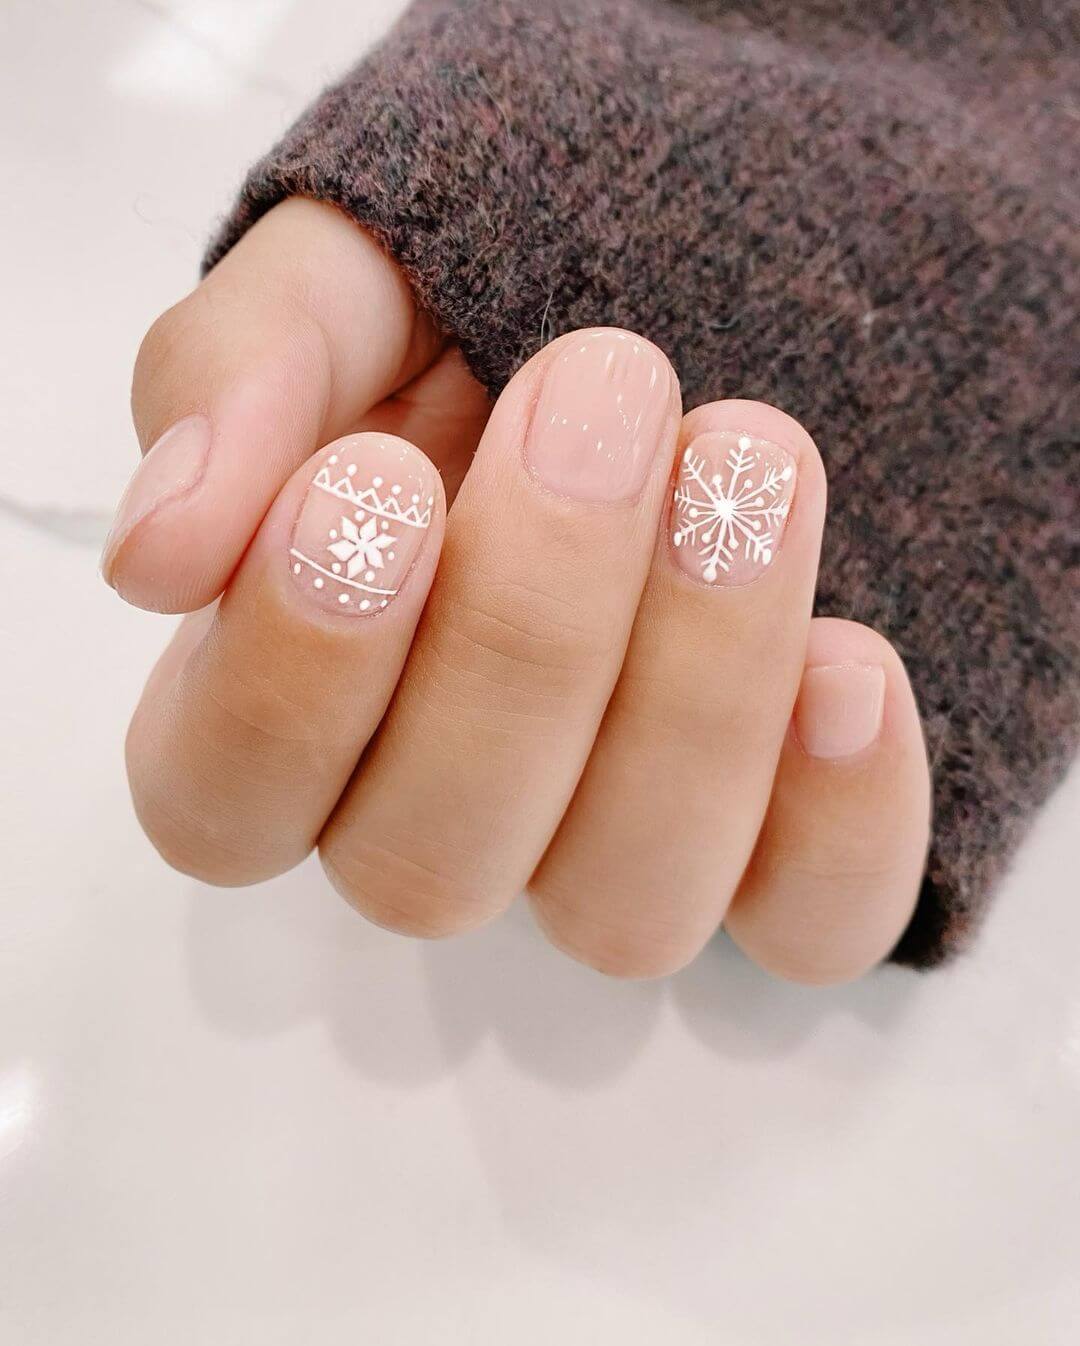 10 Classy Nail Designs That Look Awesome With Any Outfit | ShineSheets